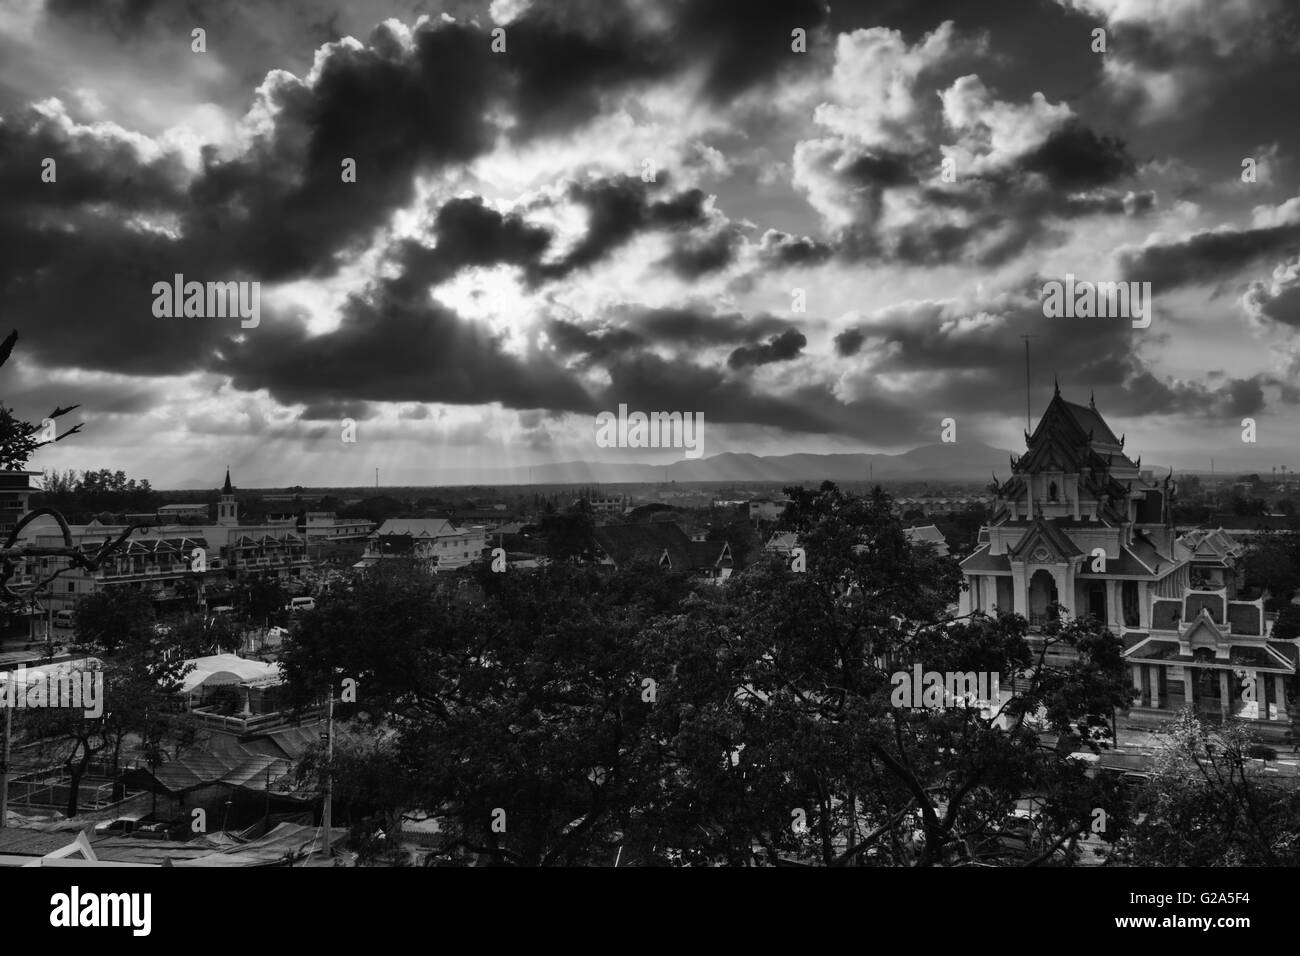 Light of rays shining through dark clouds. Thailand. low key style photography, Black and white Stock Photo